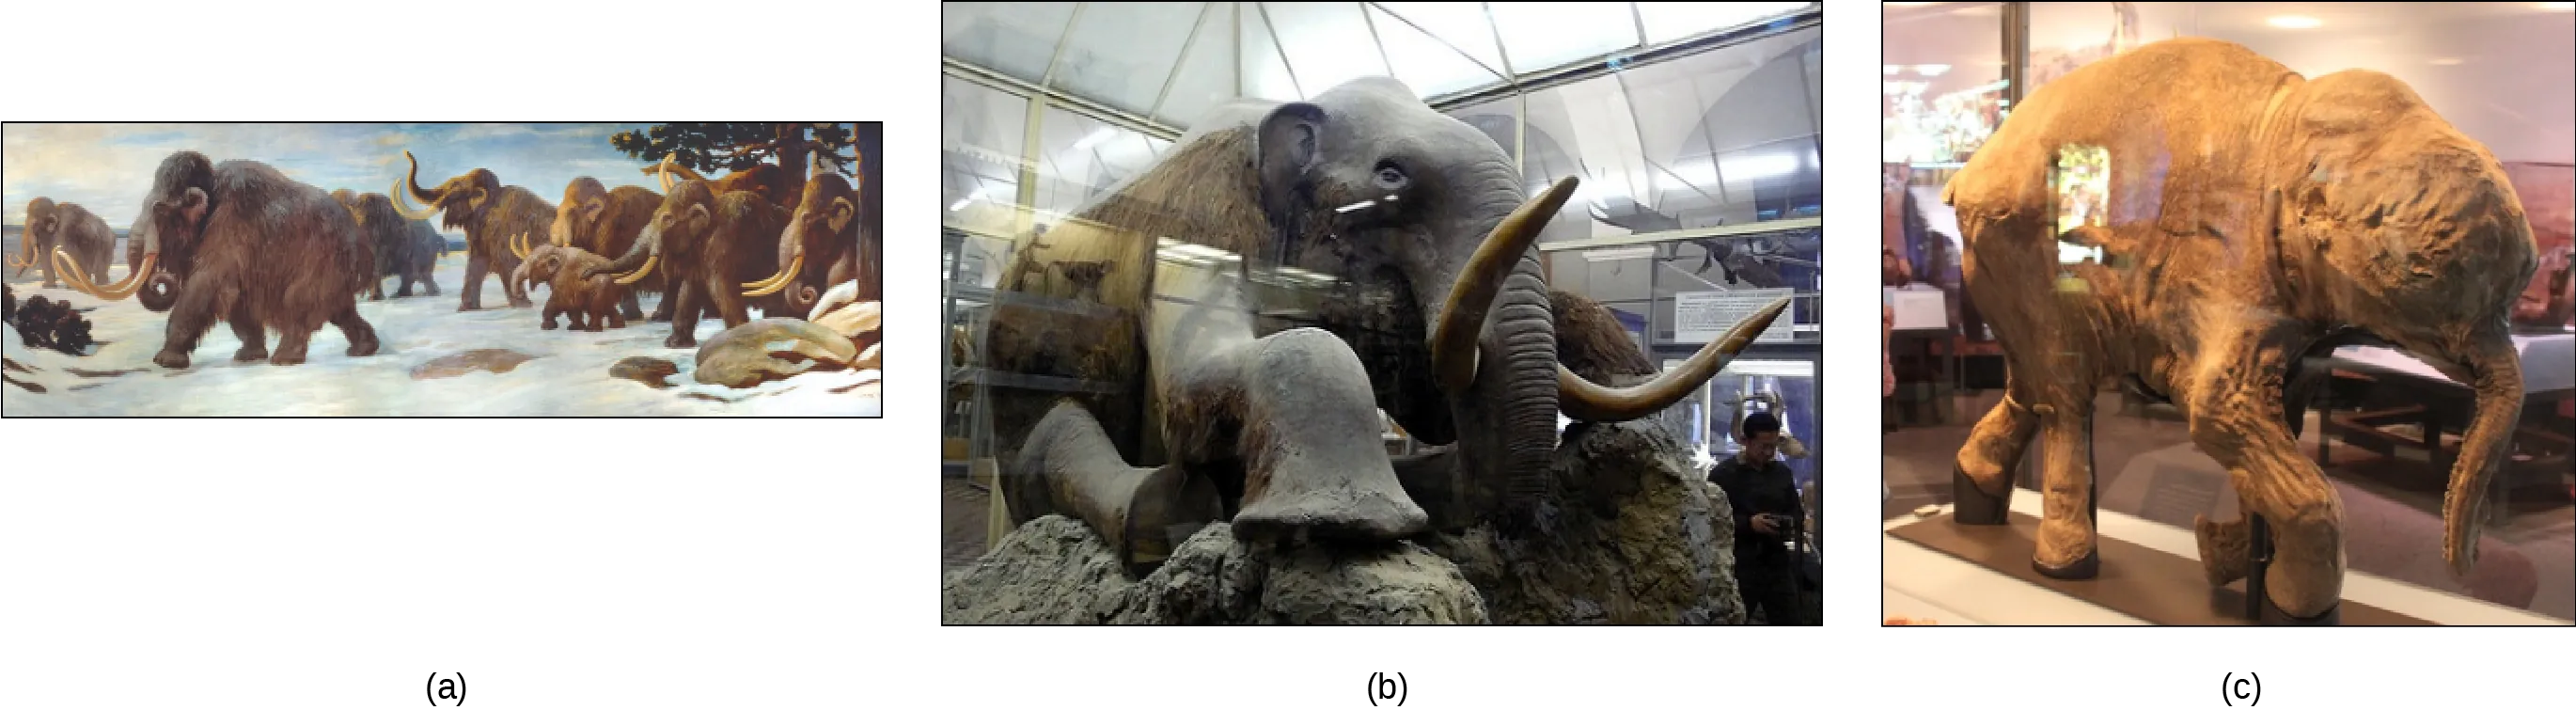 Three depictions of mammoths are shown.  They are large, elephant like creatures covered in fur and have long tusks. Photo a shows a painting of mammoths walking in the snow. Photo b shows a stuffed mammoth sitting in a museum display case. Photo c shows a mummified baby mammoth, also in a display case. Photo (b) shows a stuffed mammoth sitting in a museum display case. Photo (c) shows a mummified baby mammoth, also in a display case.